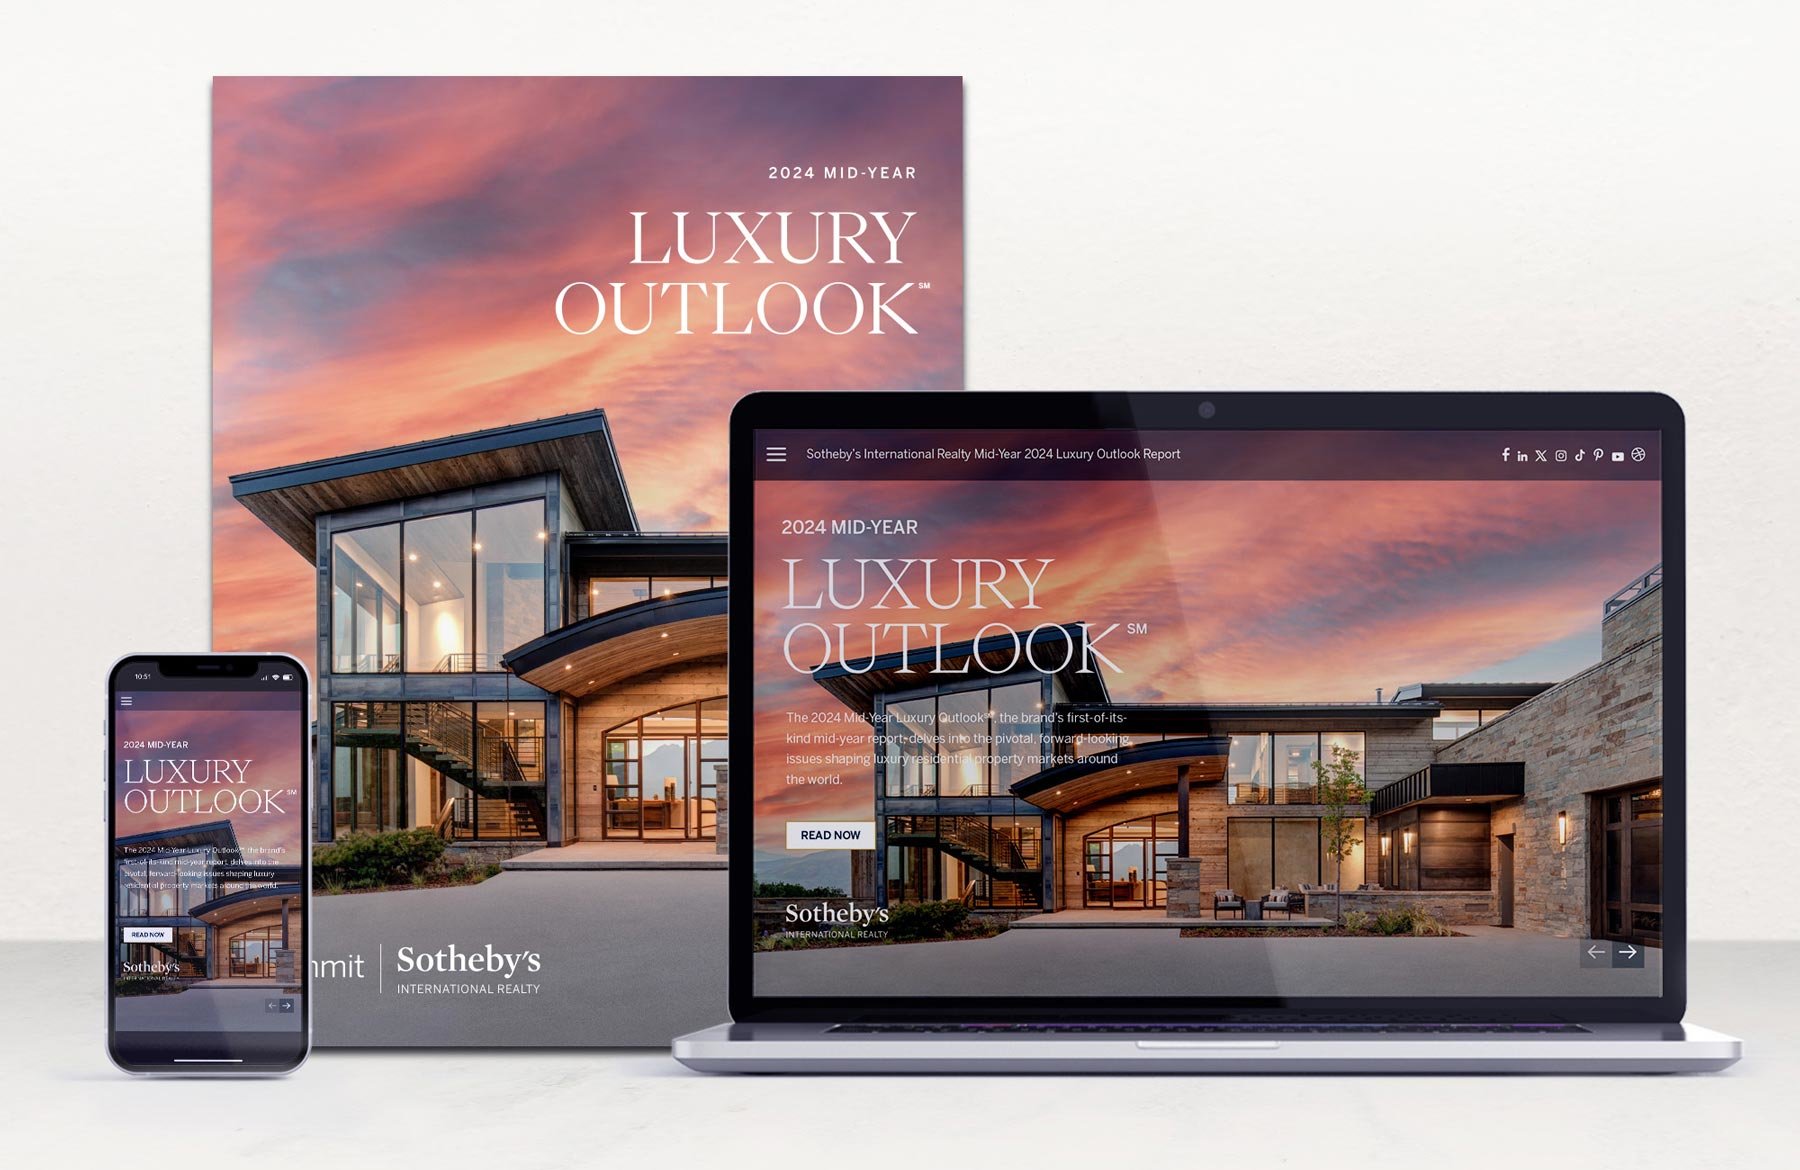 2024 Mid-Year Luxury Outlook report by Sotheby's International Realty